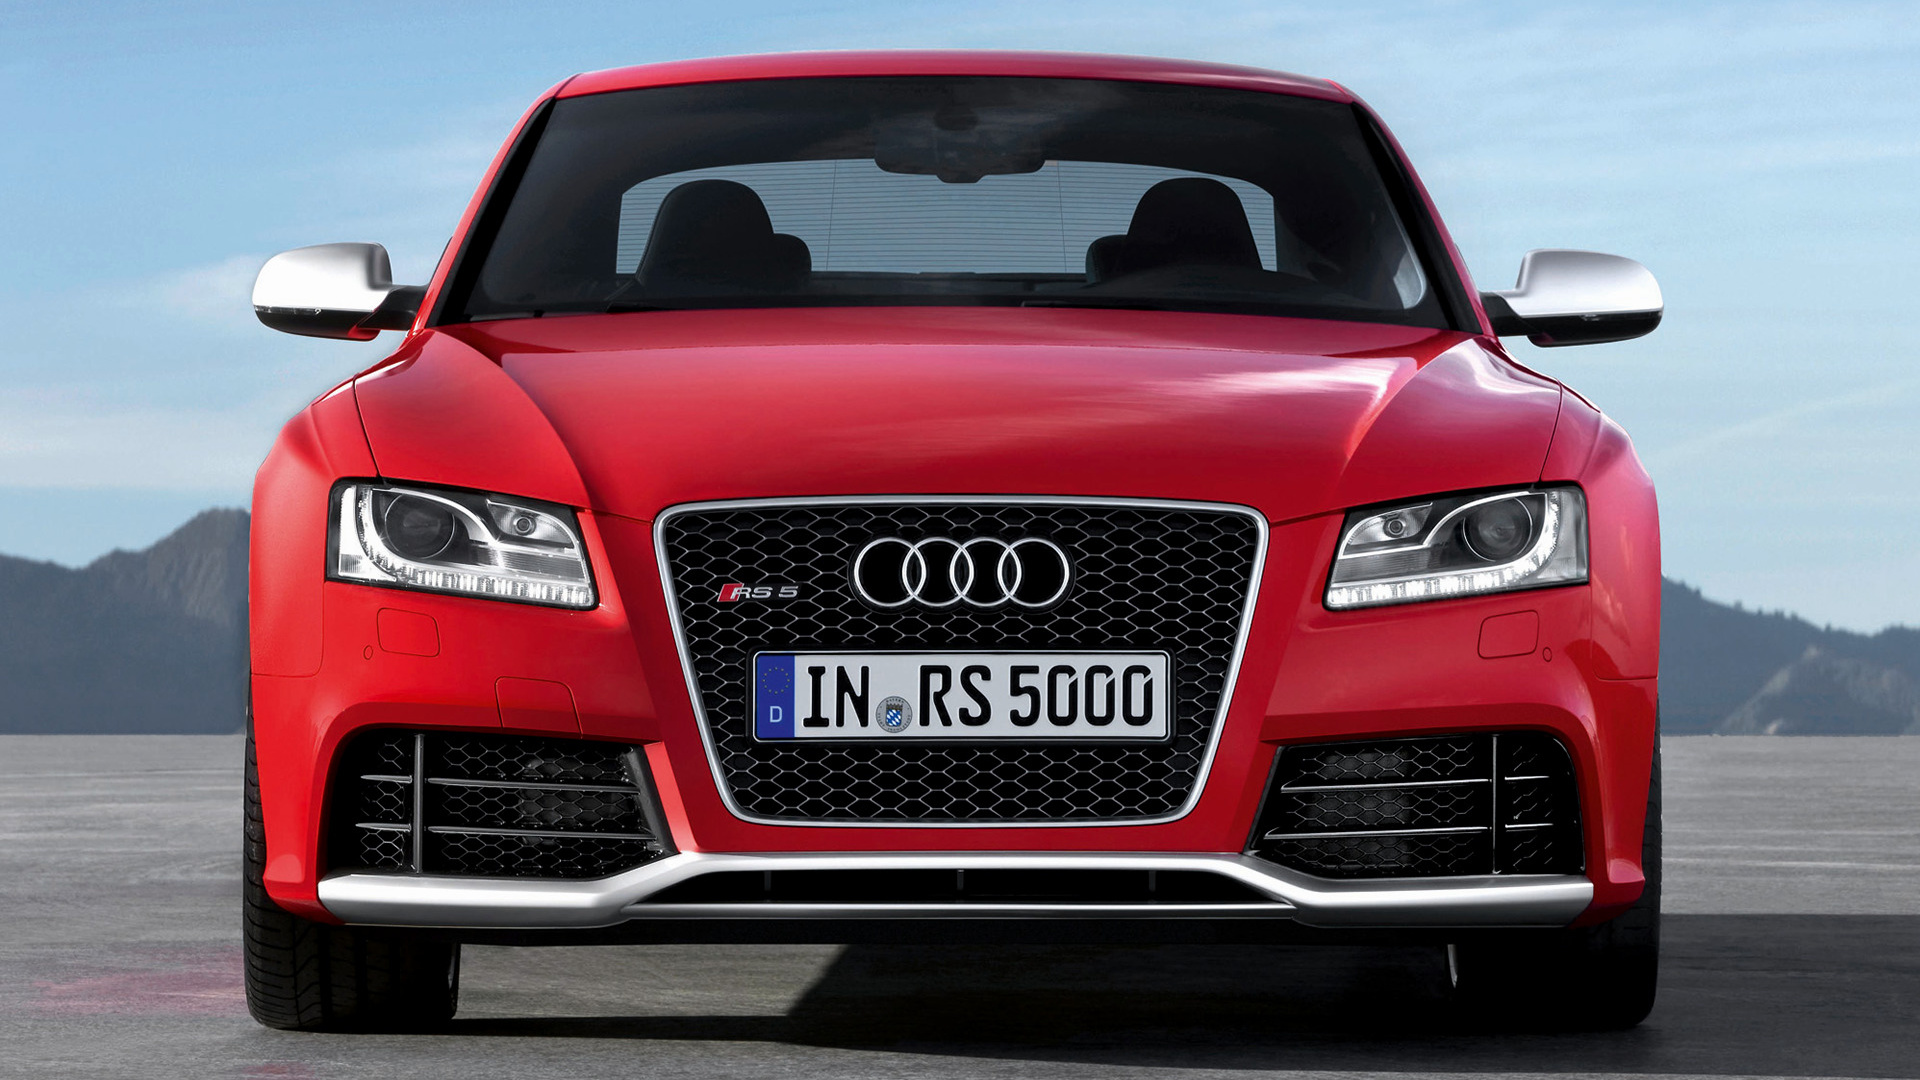 Audi Rs5 Car Coupe Luxury Car Red Car 1920x1080